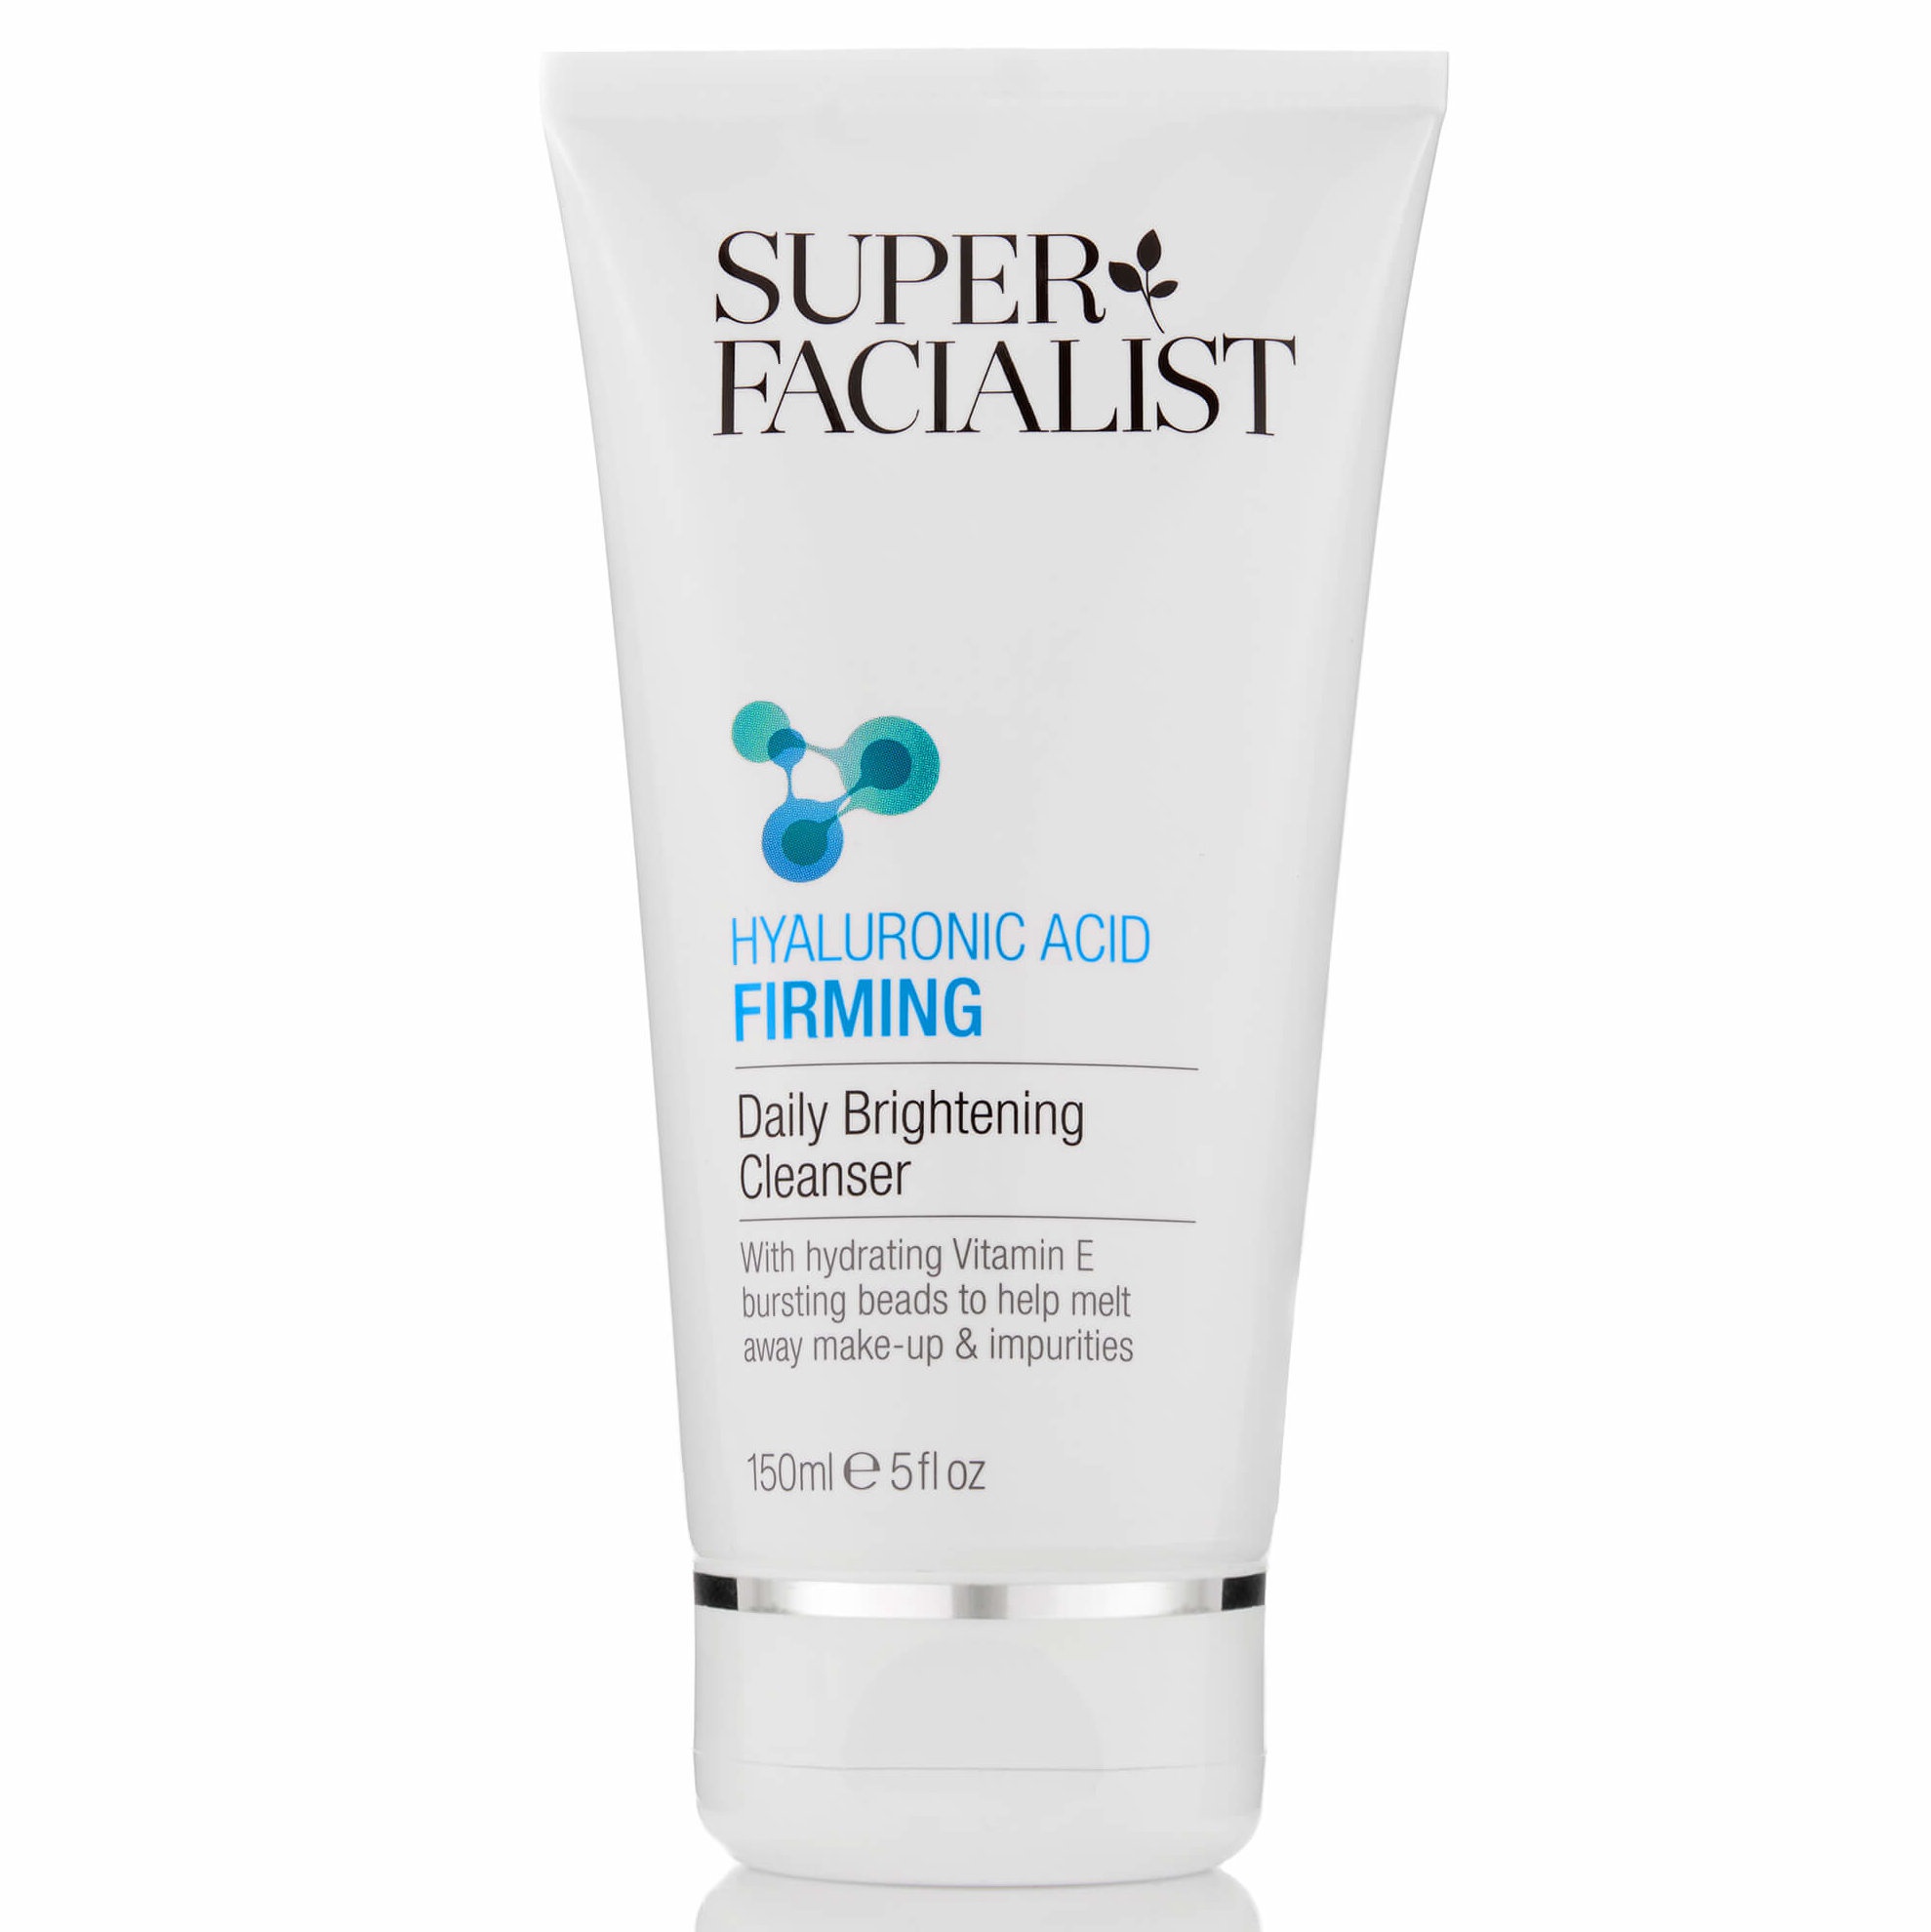 Super Facialist Hyaluronic Acid Firming Daily Brightening Cleanser